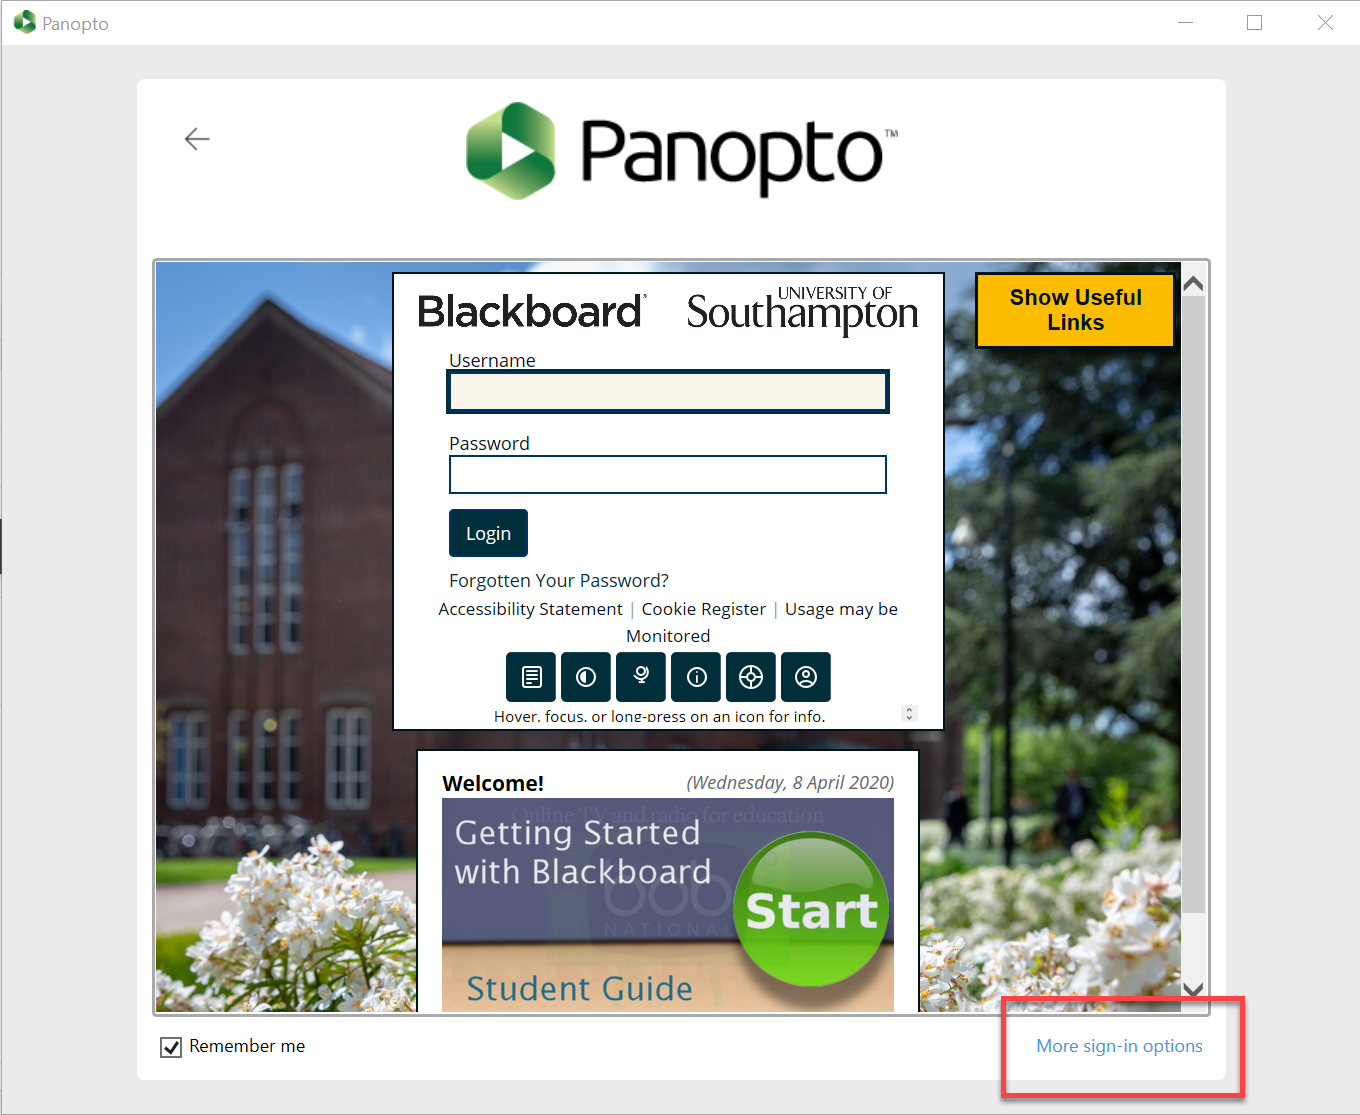 A view of the Panopto recorder showing a Blackboard login page. To the bottom right highlighted is a text button of 'More sign-in options'.